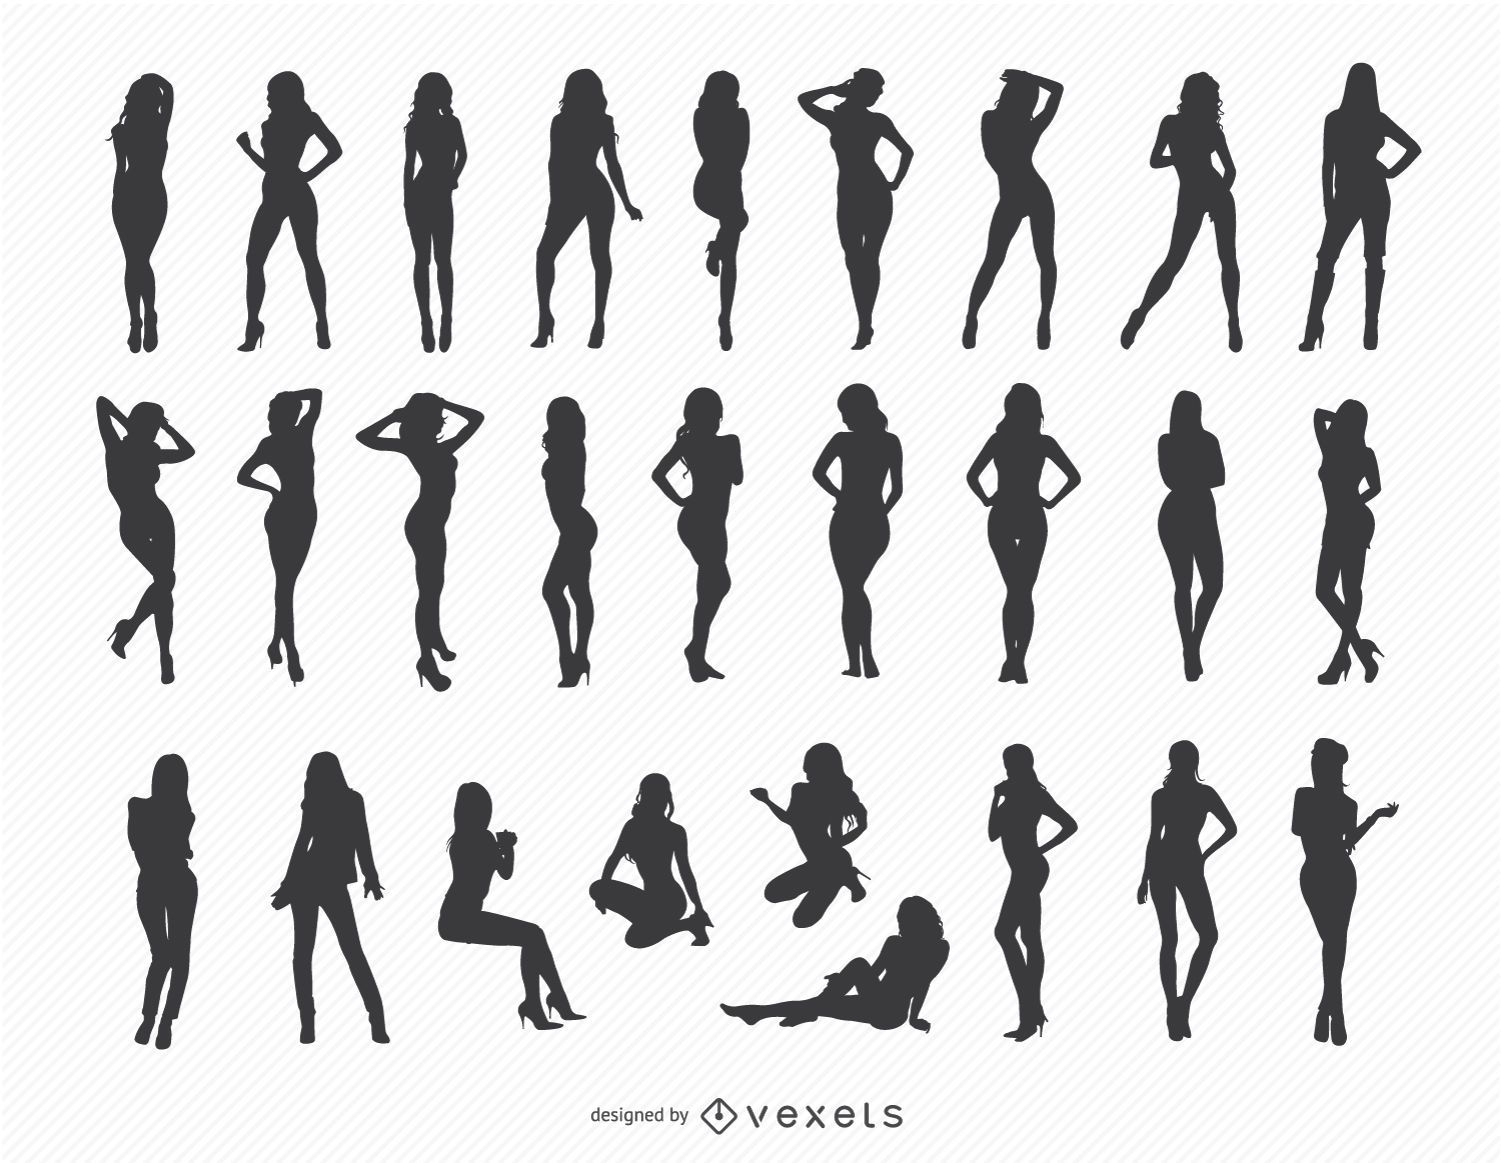 Sexy Girl Silhouettes Vector Download